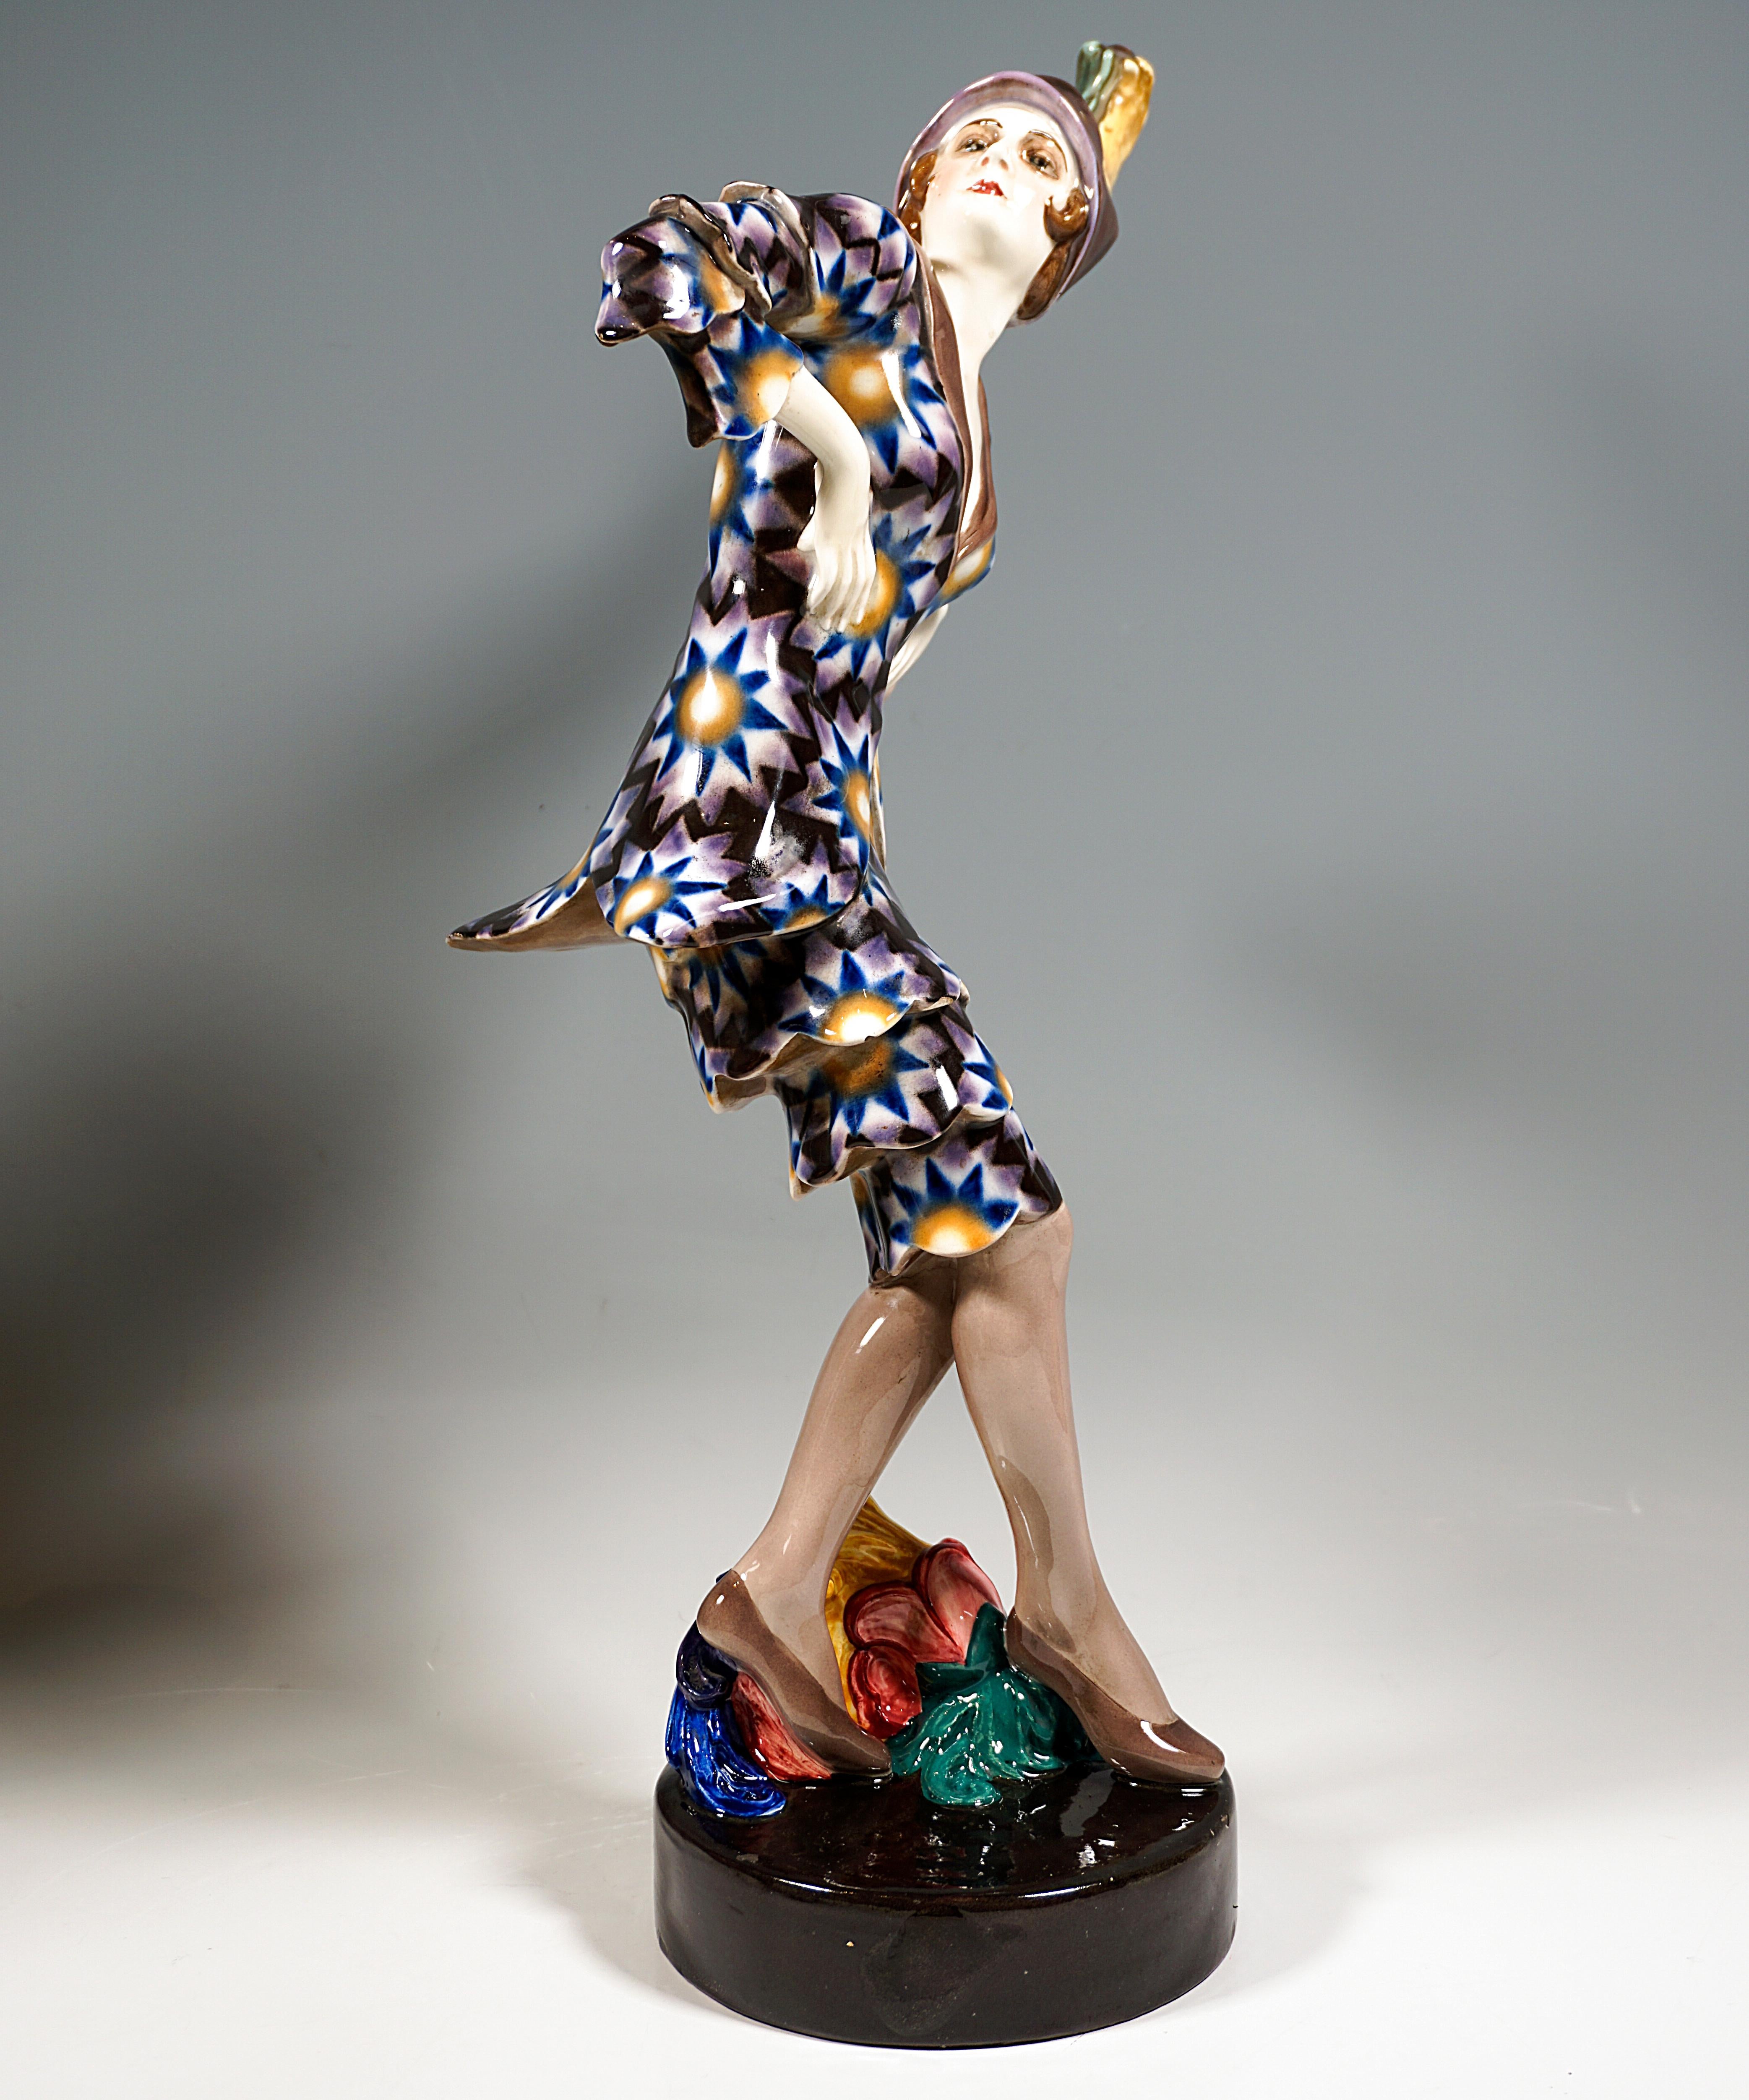 Rare Art Ceramics Model by Goldscheider from the 1920s:
Portrayal of the dancer Lucie Kieselhausen in an exotic costume consisting of a jacket and knee-length skirt with star decoration in brown, blue and yellow, sleeves and skirt part with tiered